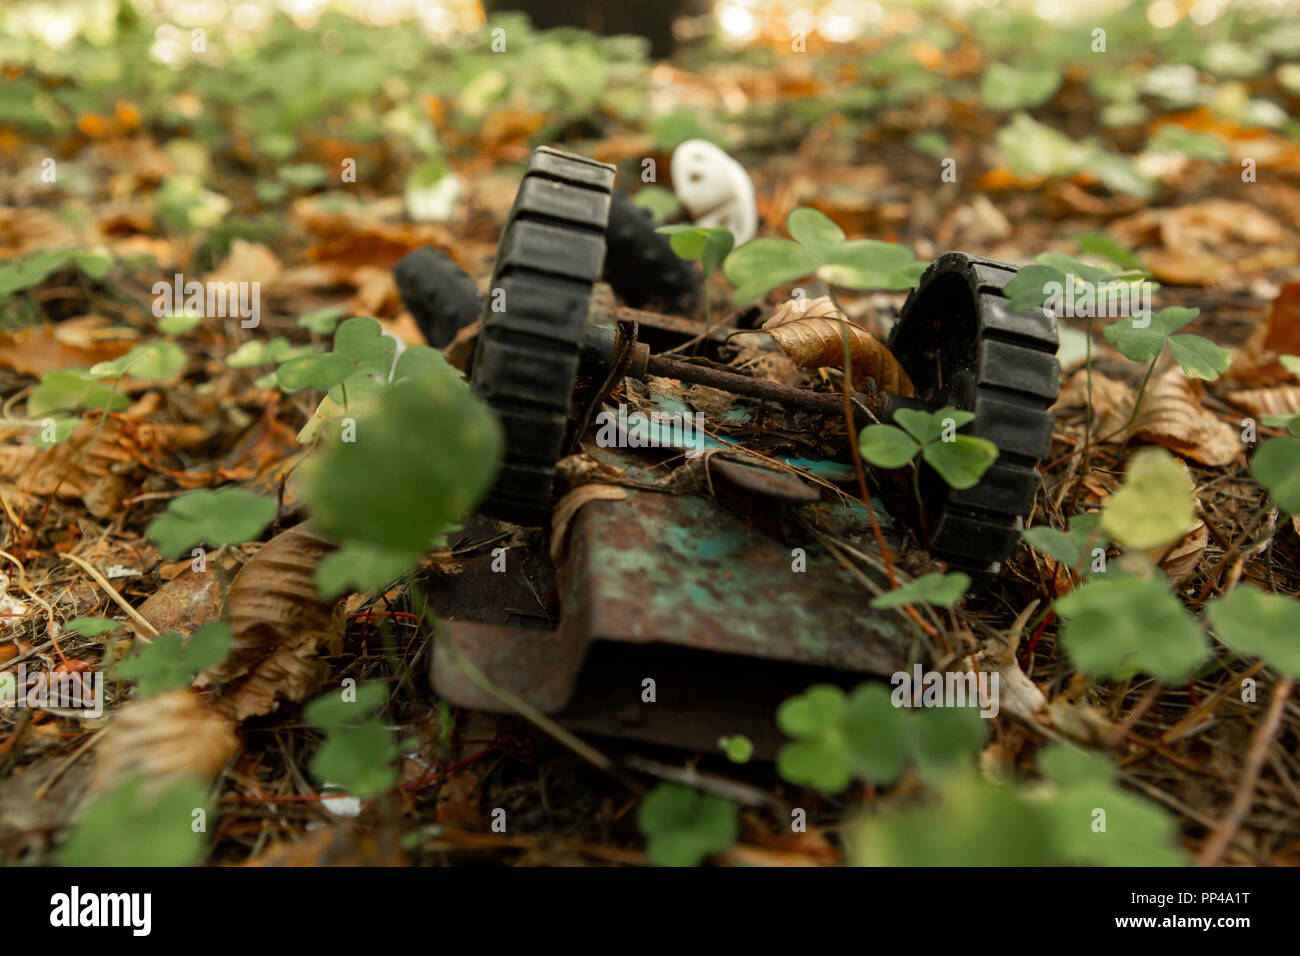 An old, abandoned toy left in the forest. Rusty, children's typewriter in the autumn foliage. Sunlight. A rough plan. Stock Photo